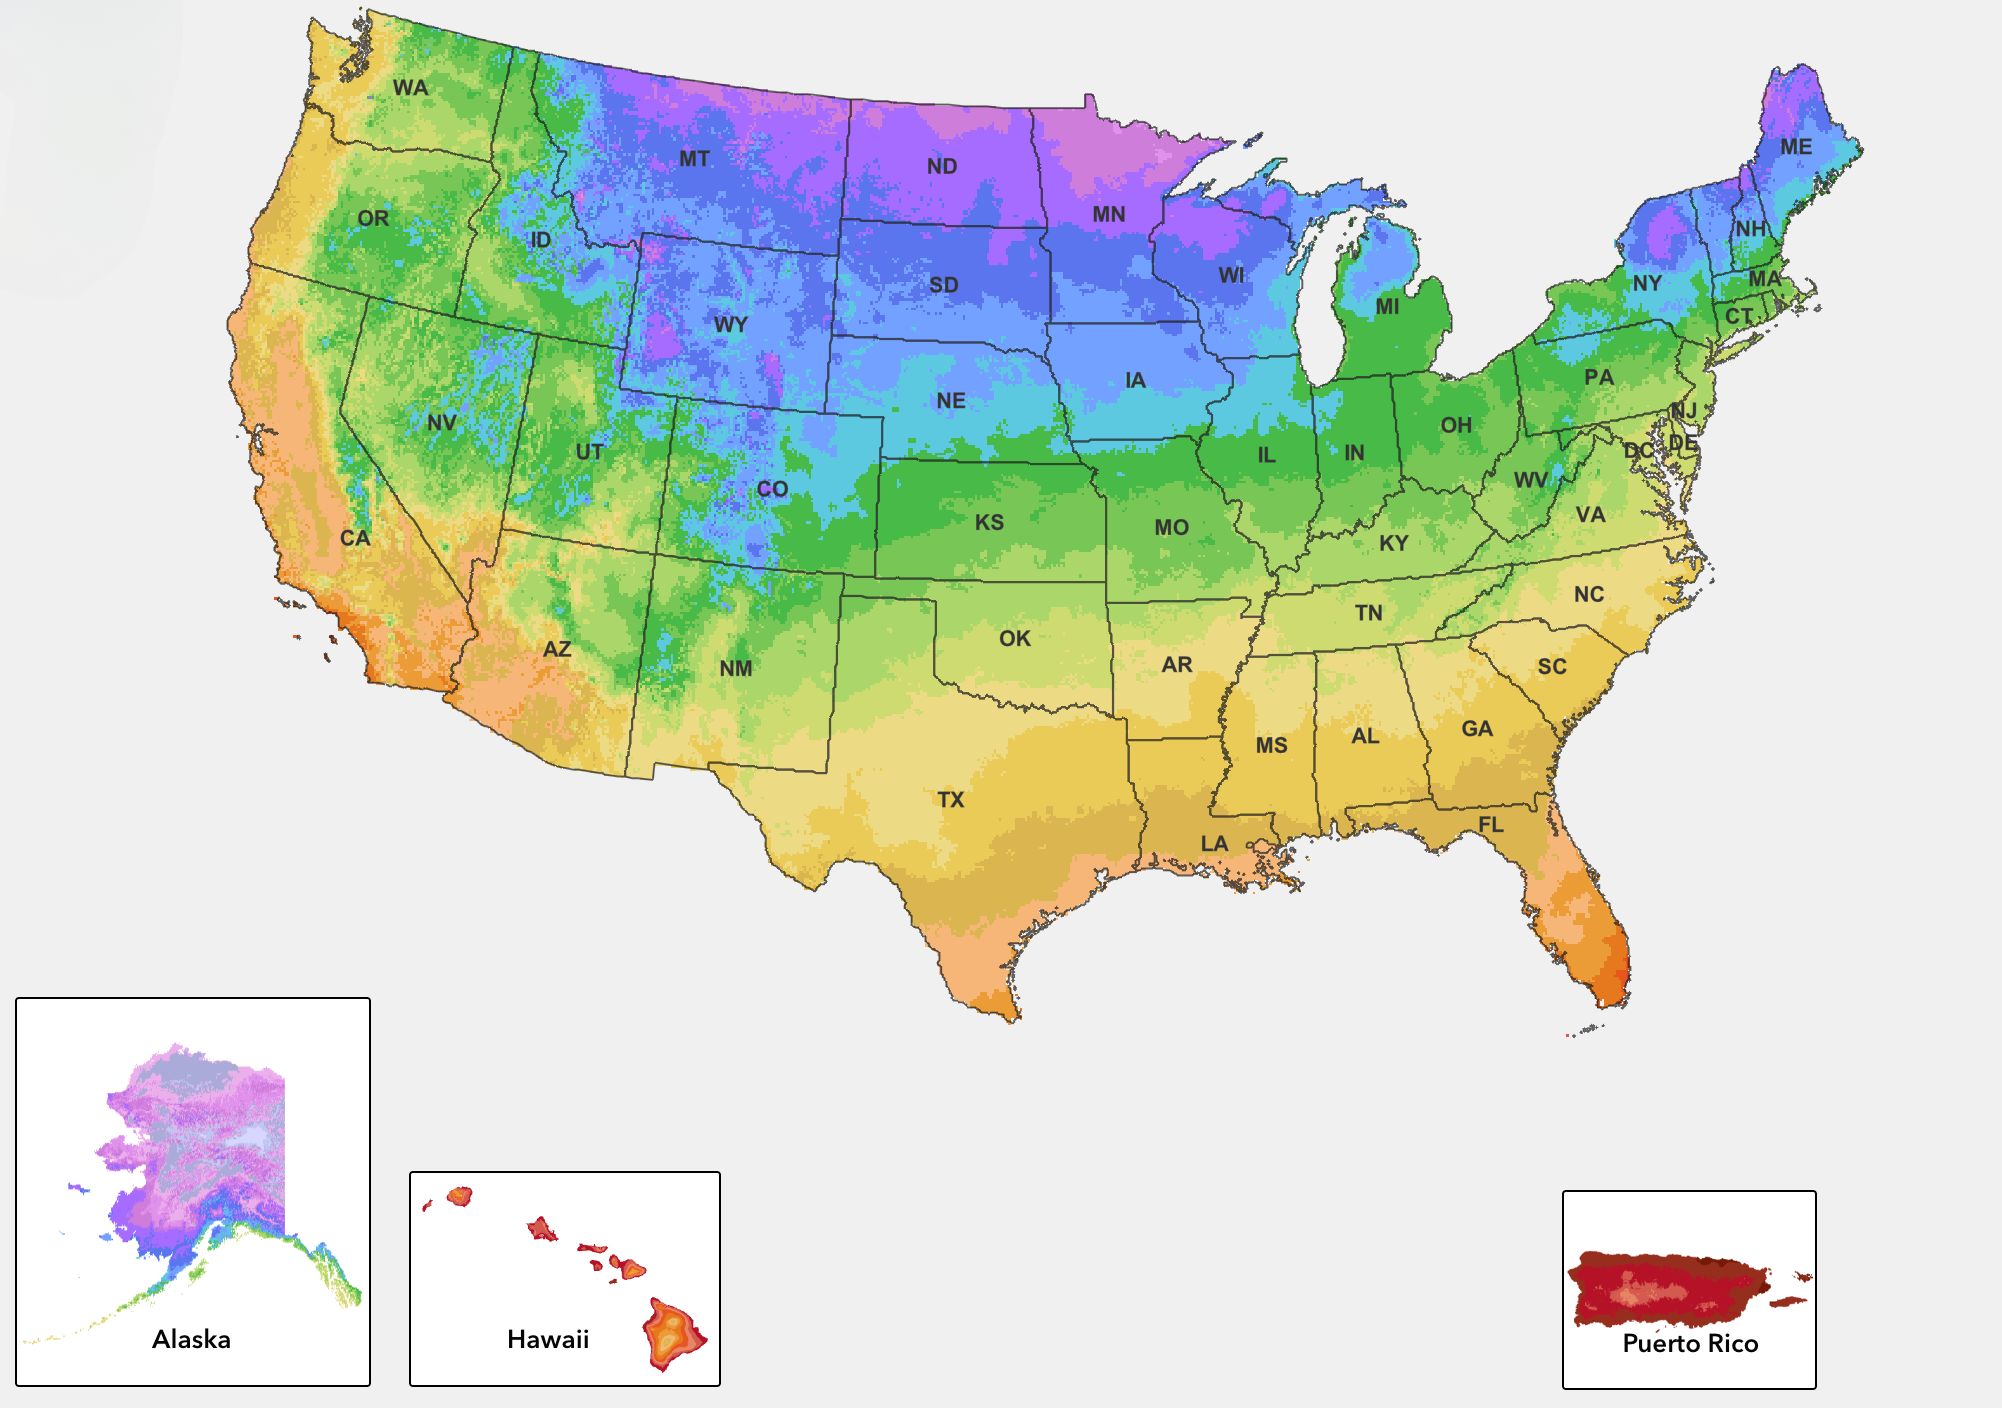 2023 USDA Plant Zone Map, Plant Hardiness Map of the USA (including Alaska, Hawaii, and Puerto Rico)